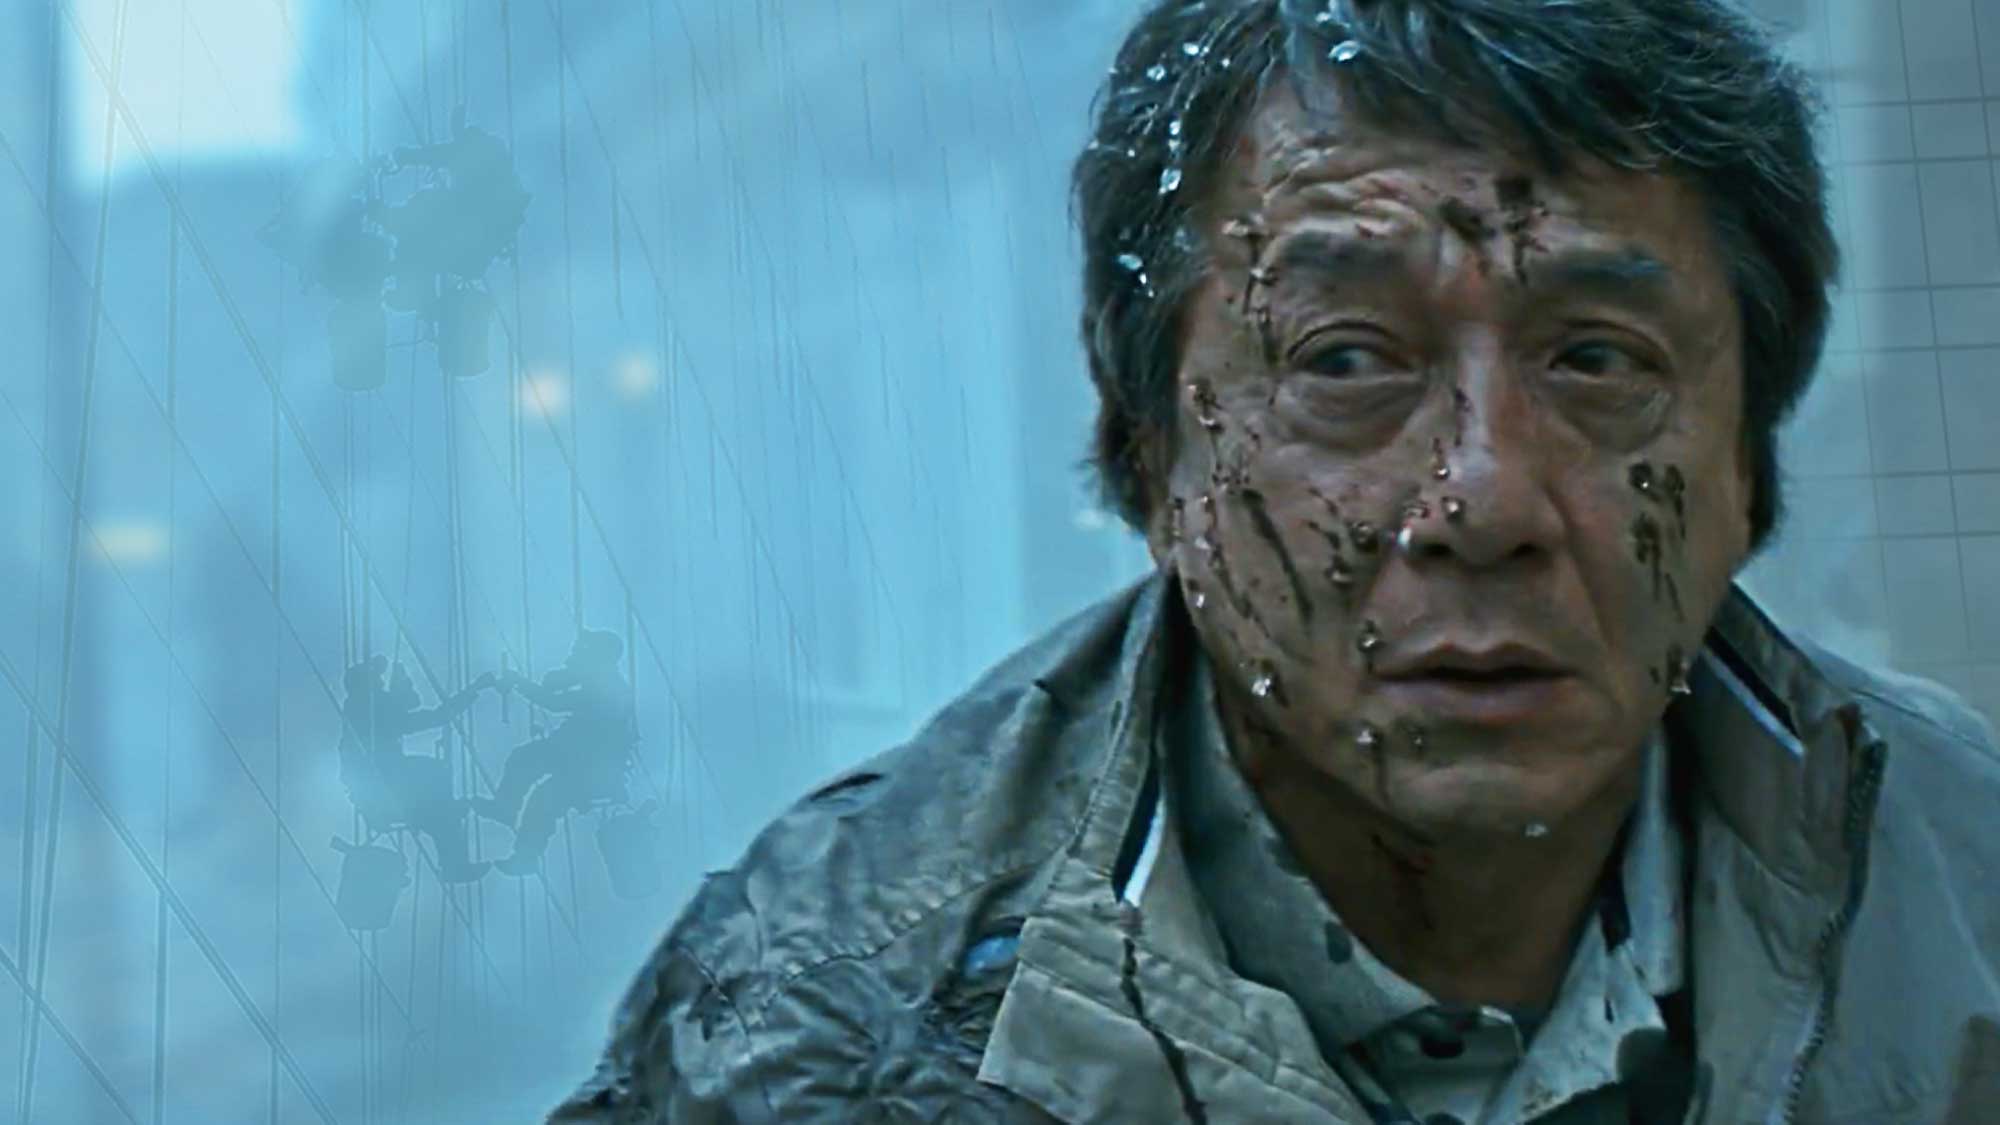 Nosebleed - The Jackie Chan Film That Was Canceled After 9/11